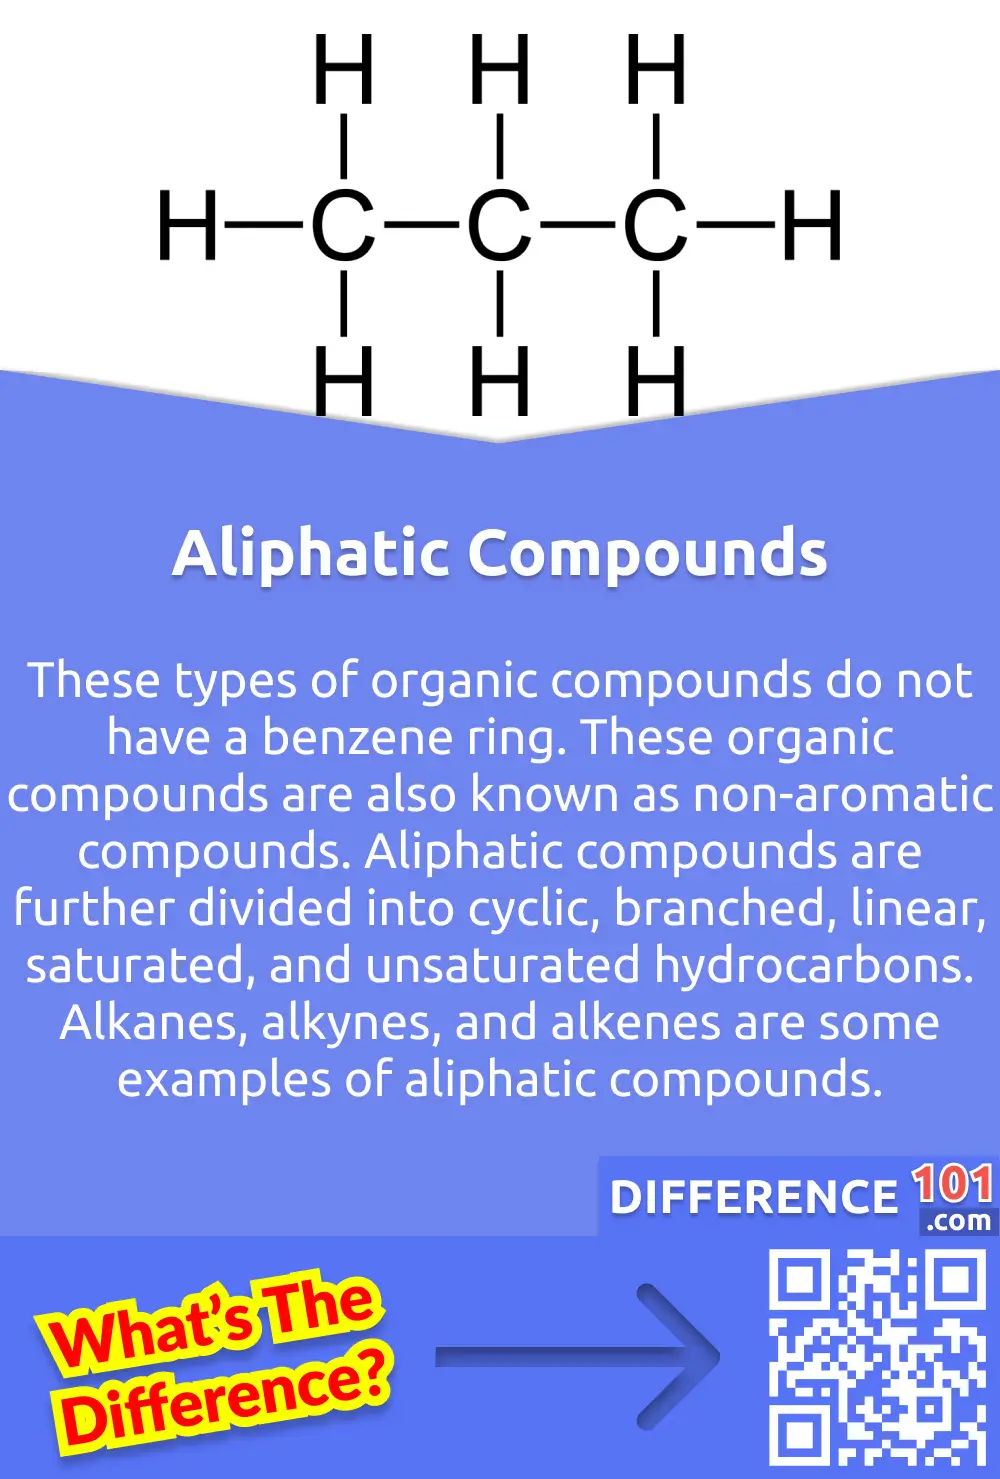 What Are Aliphatic Compounds? These types of organic compounds do not have a benzene ring. These organic compounds are also known as non-aromatic compounds. Aliphatic compounds are further divided into cyclic, branched, linear, saturated, and unsaturated hydrocarbons. Alkanes, alkynes, and alkenes are some examples of aliphatic compounds.